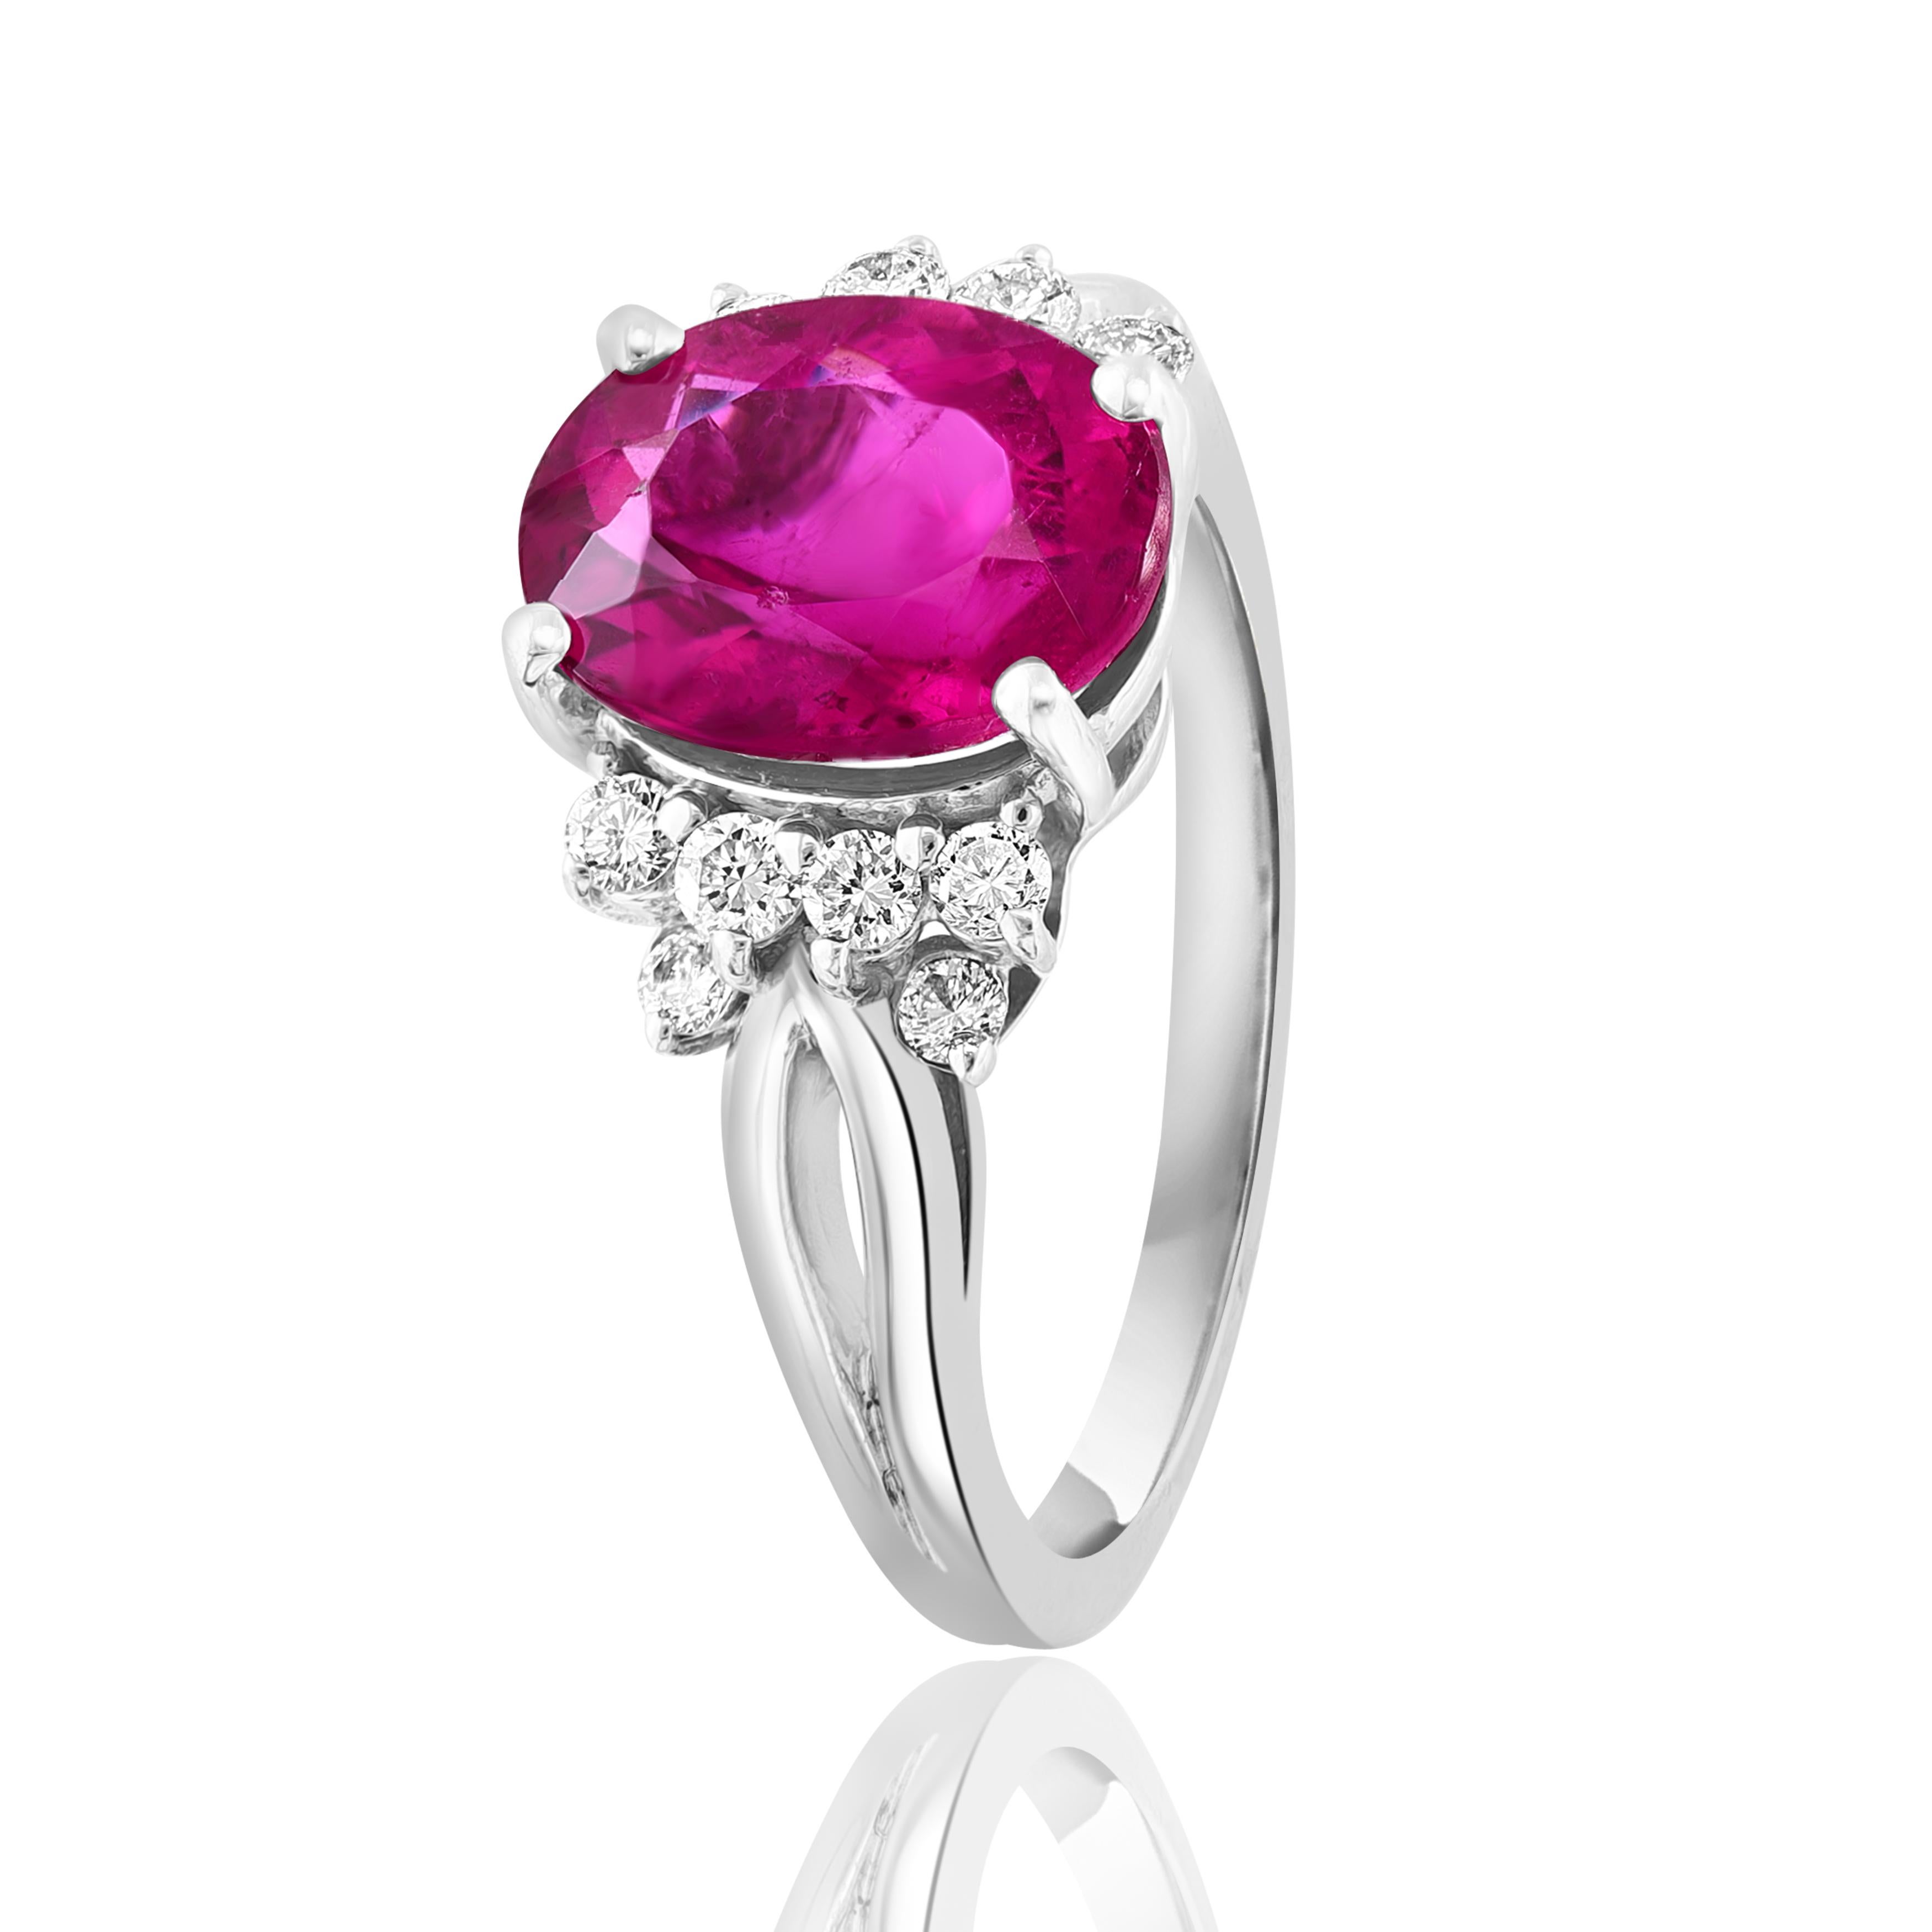 Modern 2.80 Carat Oval Cut Pink Tourmaline and Diamond Ring in 18K White Gold For Sale